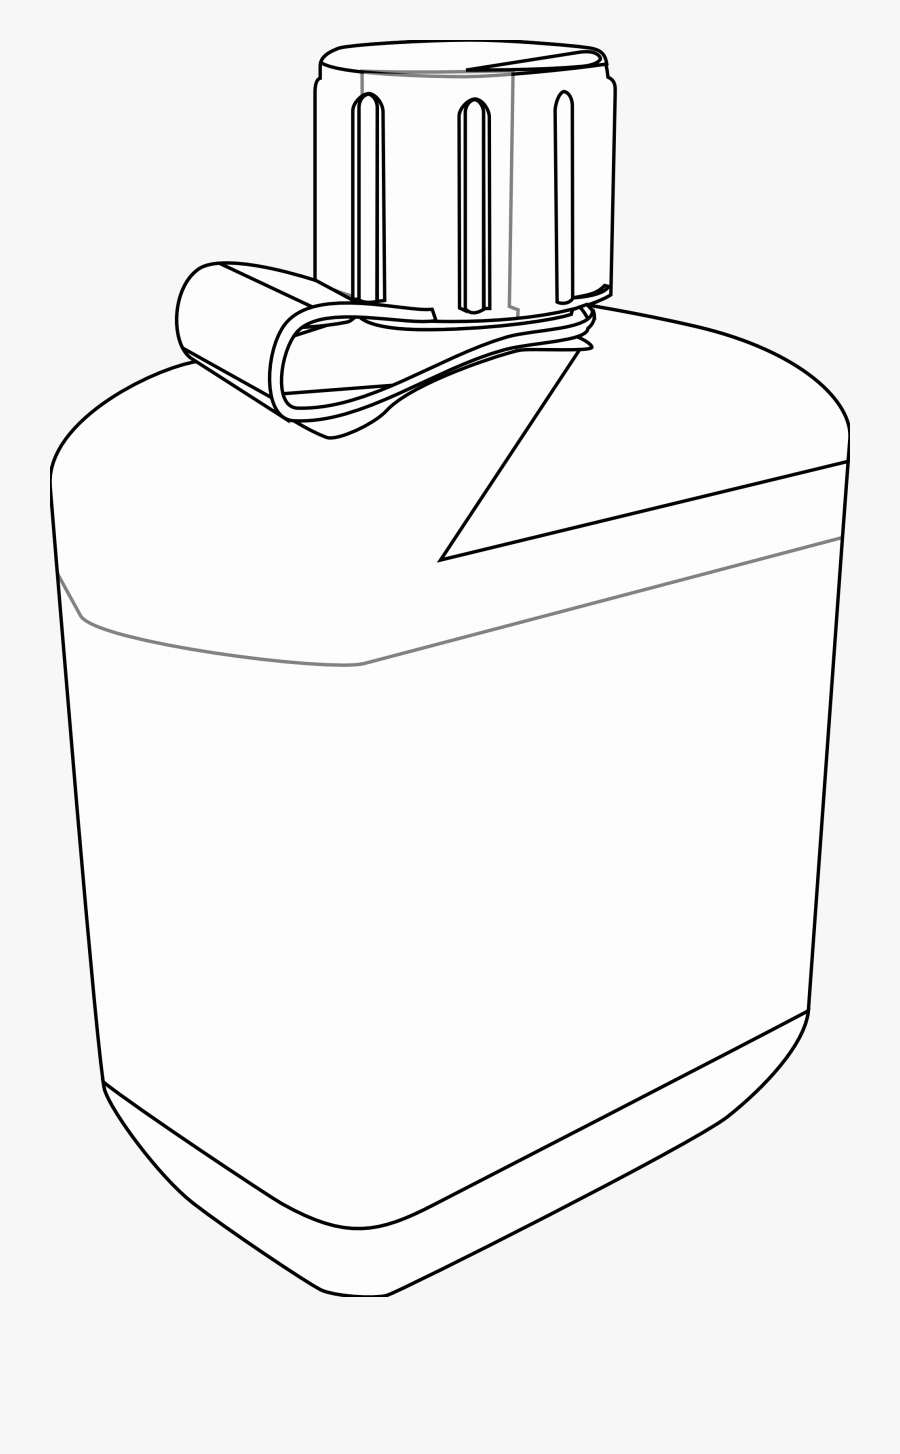 Canteen Black White Line Art Coloring Book Colouring - Illustration, Transparent Clipart